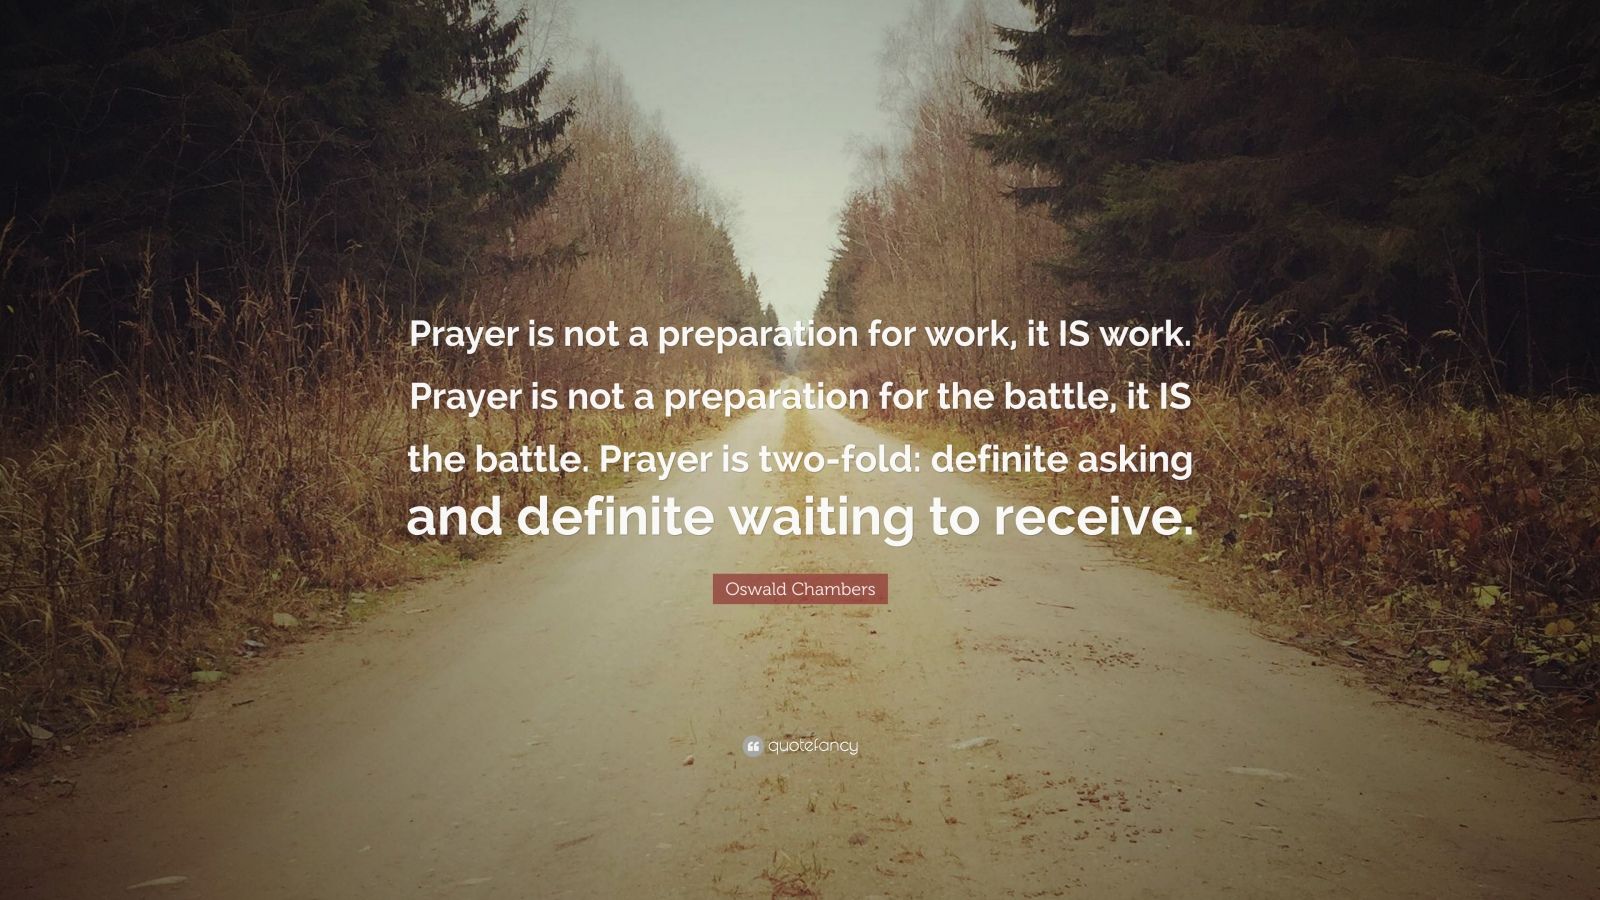 Oswald Chambers Quote “Prayer is not a preparation for